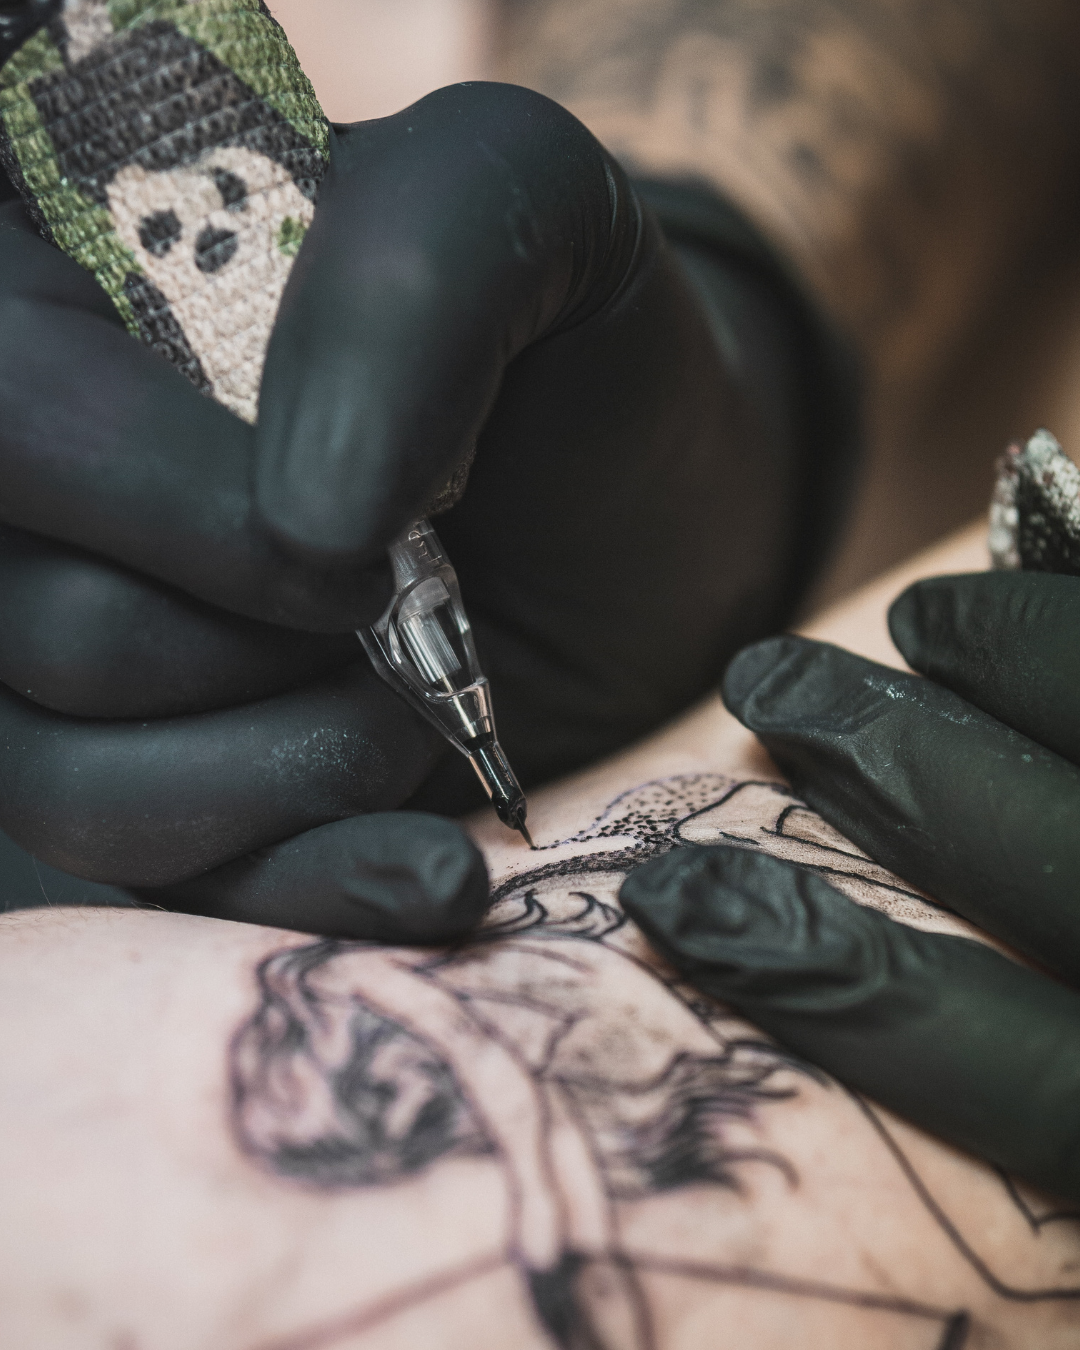 Tattoo Removal: Methods, Pains & Risks - Premier Clinic